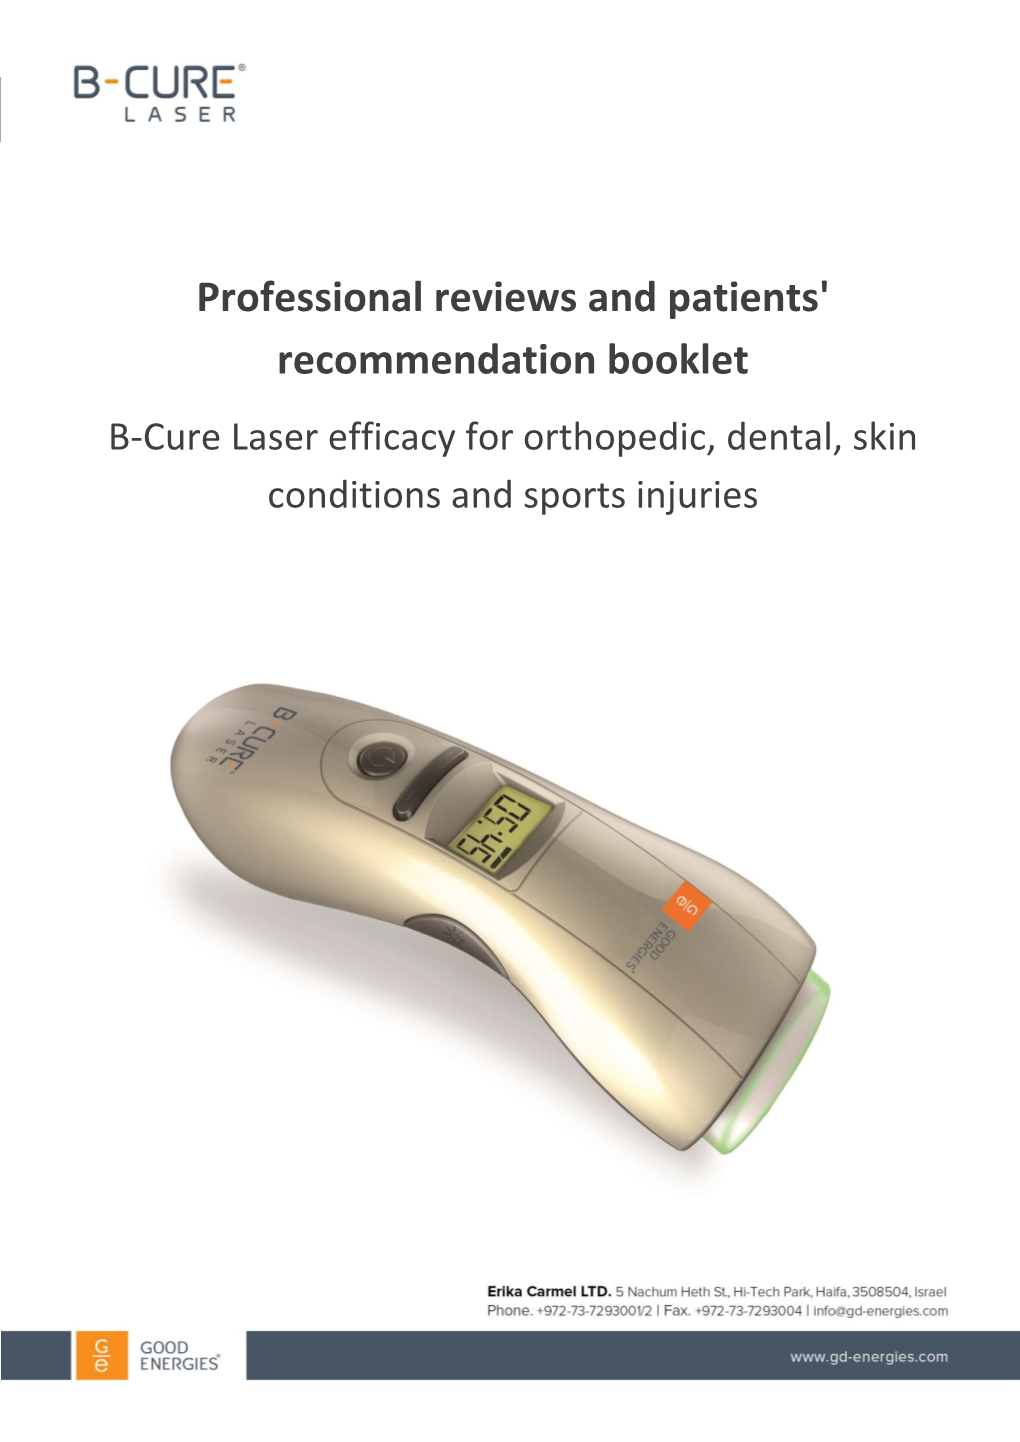 Professional Reviews and Patients' Recommendation Booklet B-Cure Laser Efficacy for Orthopedic, Dental, Skin Conditions and Sports Injuries